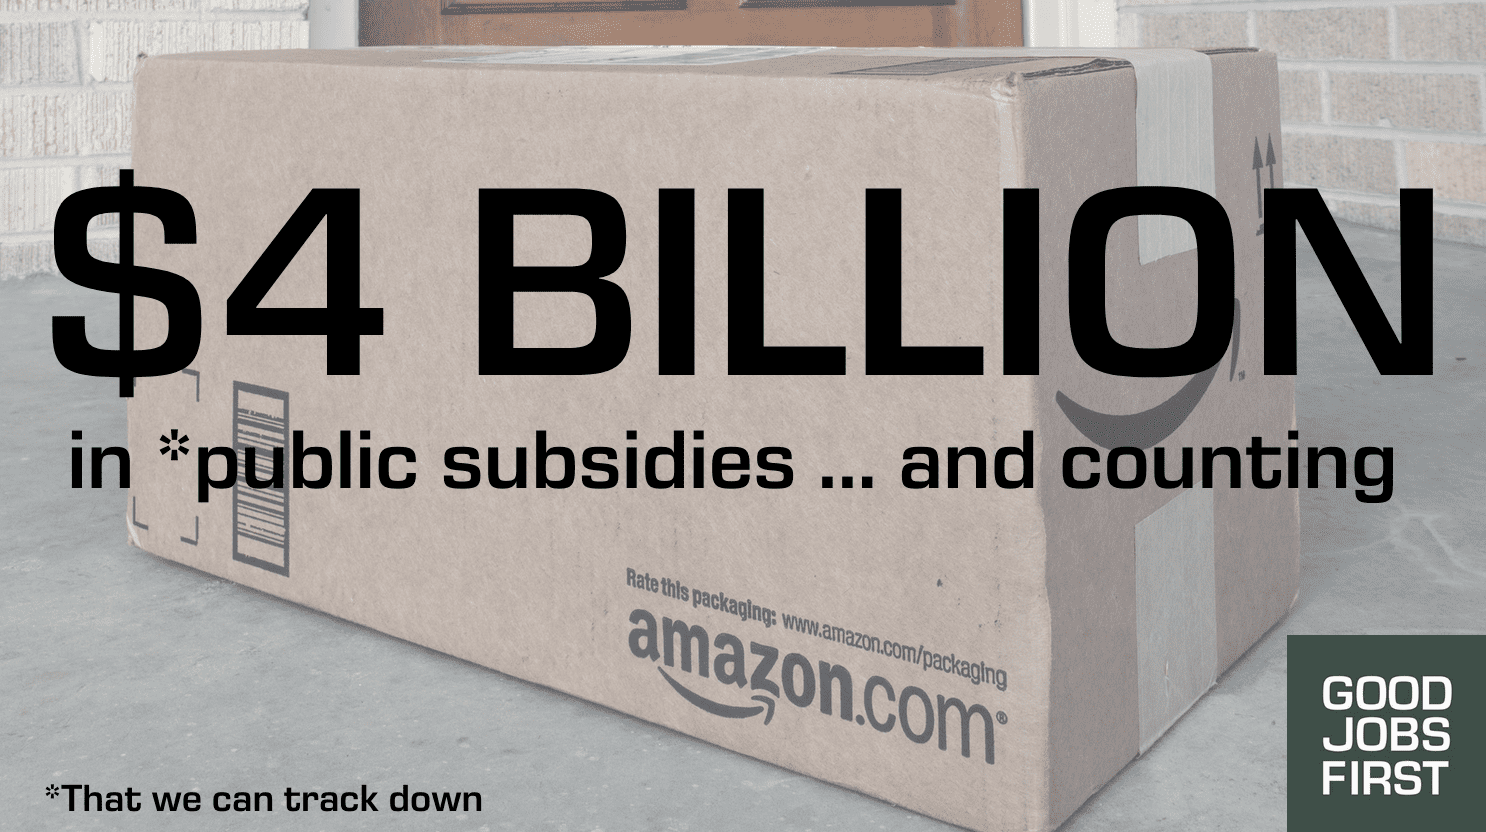 An Amazon box and the words "Amazon has gotten $4 billion in public subsidies since 2000.